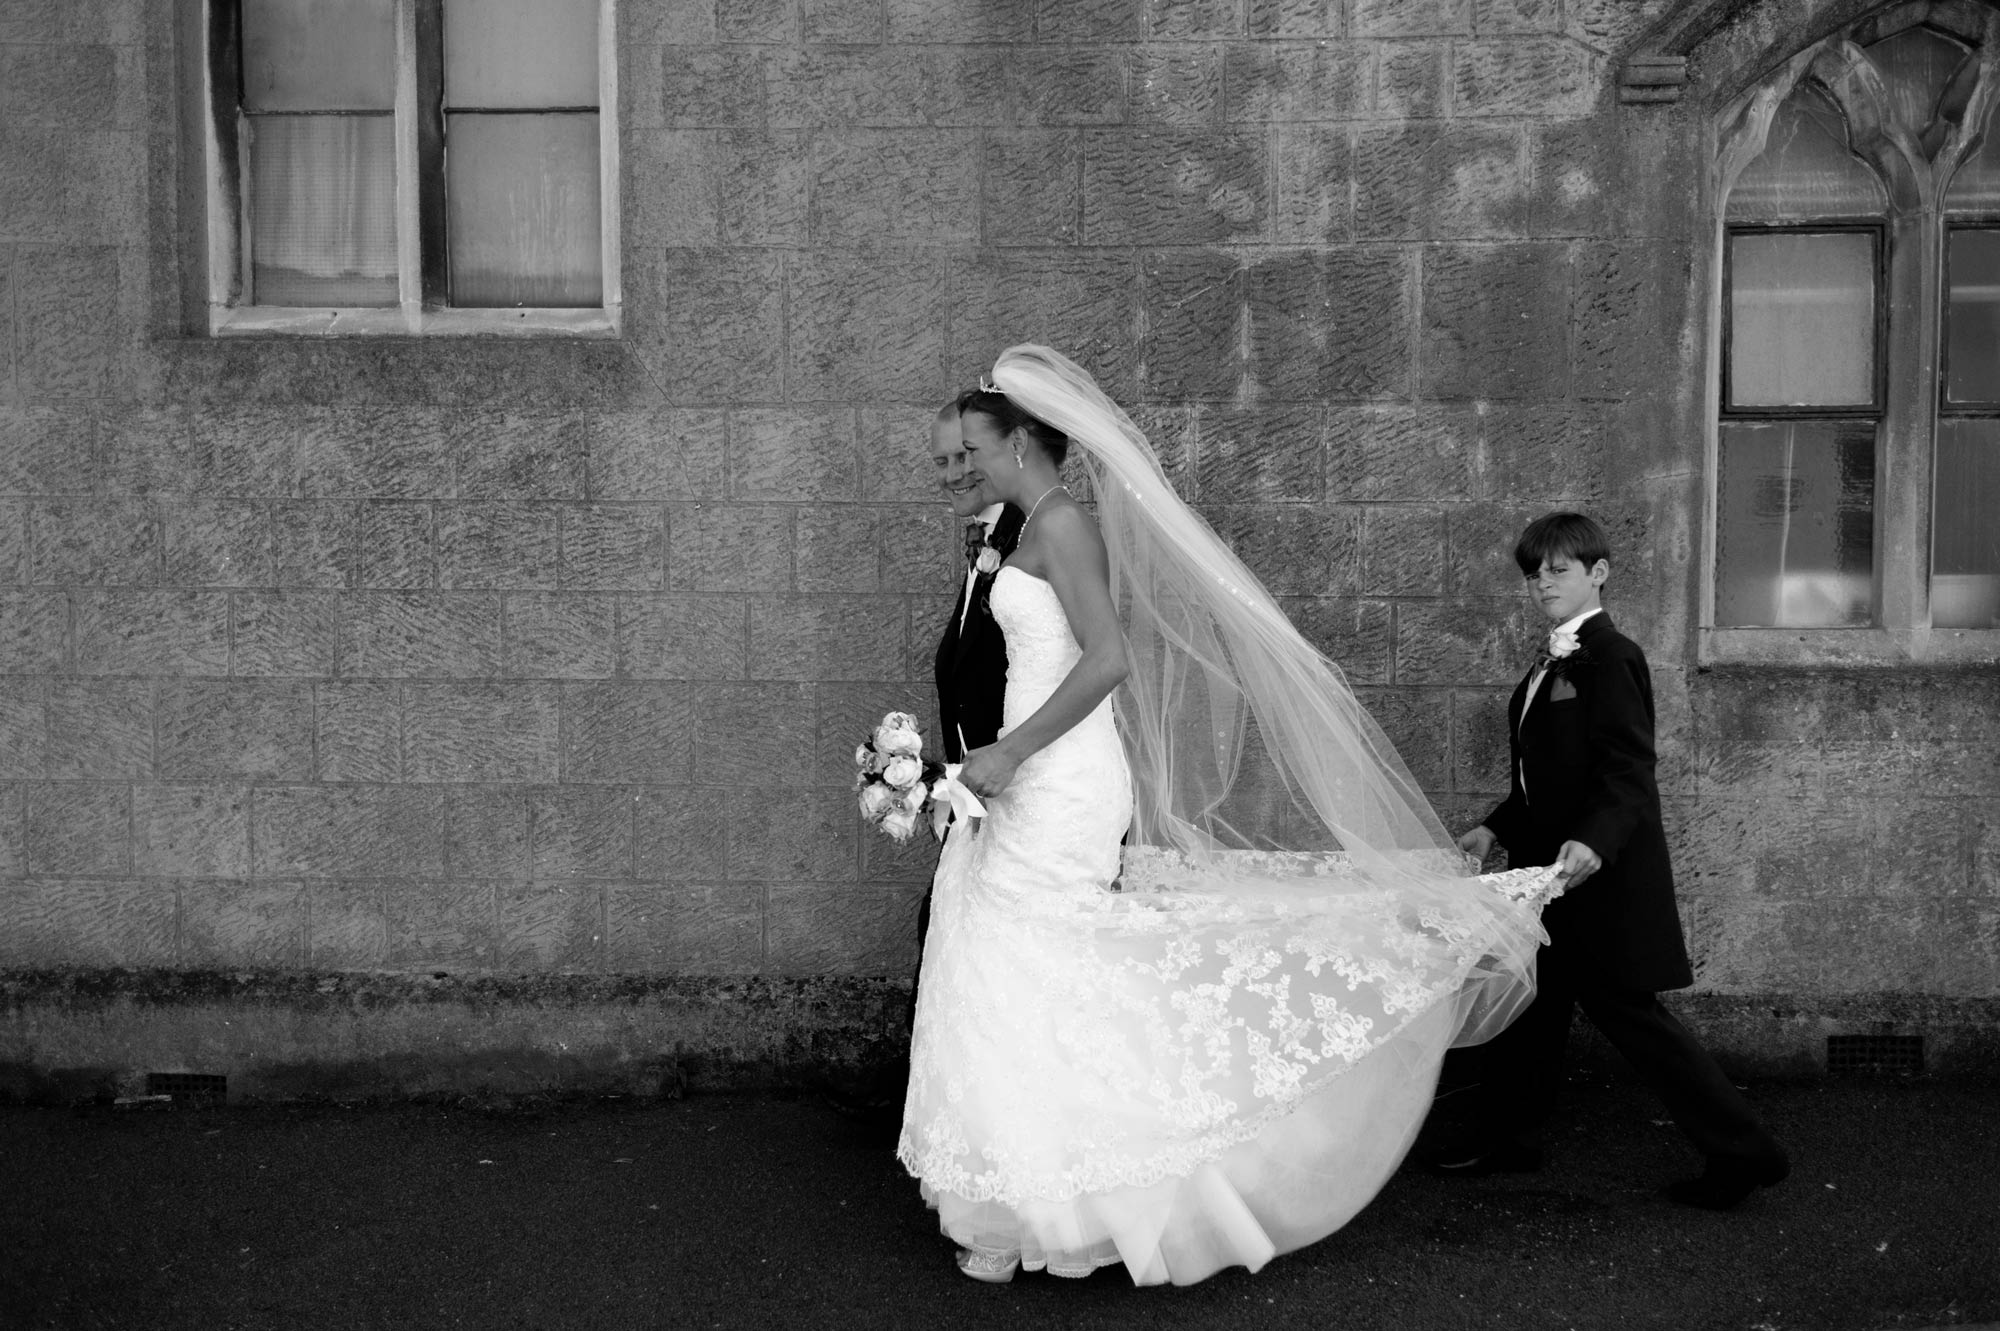 Pageboy holding bride's dress as she walks with groom